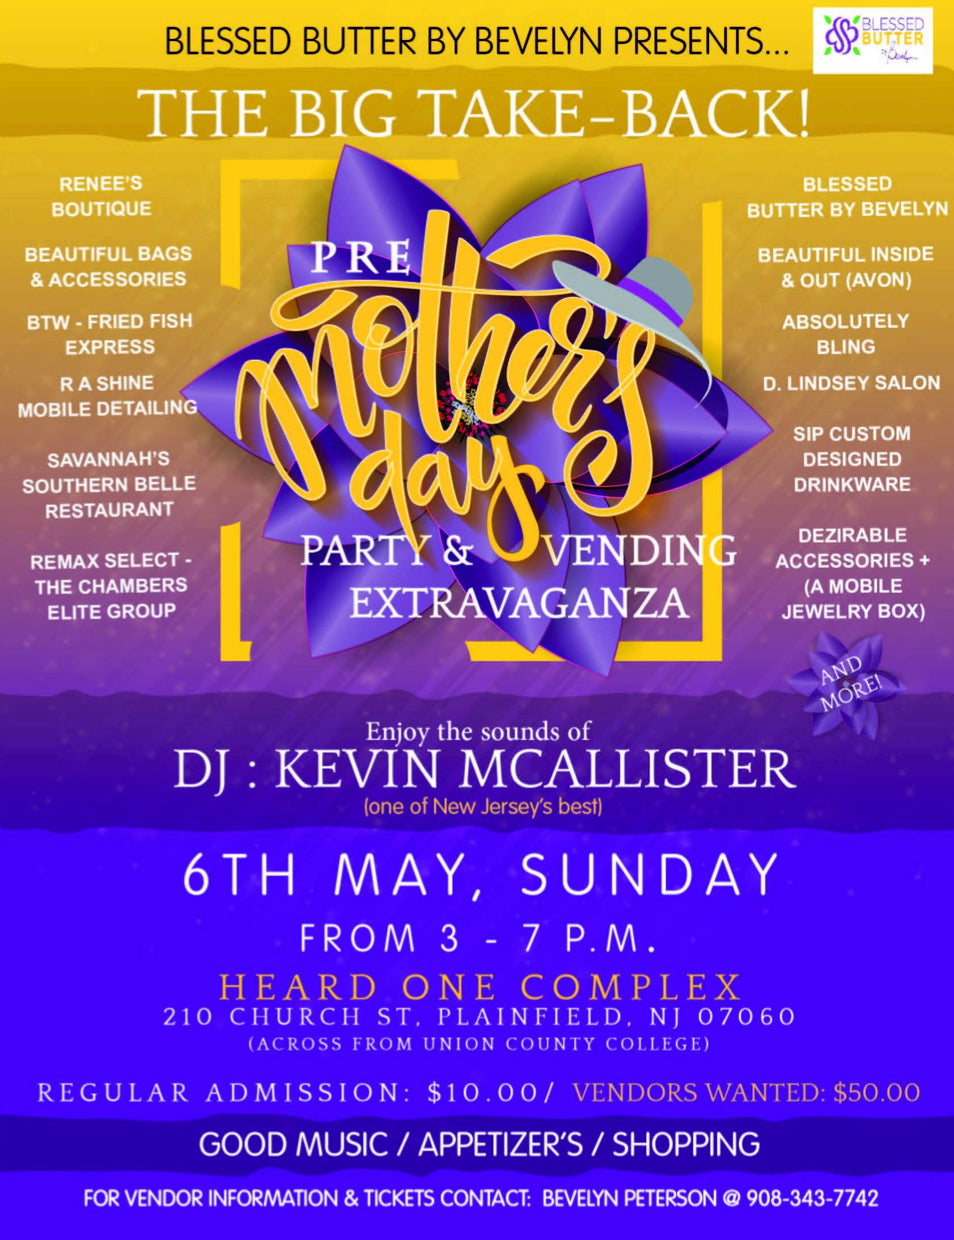 Pre-Mothers Day Party & Vending Extravaganza